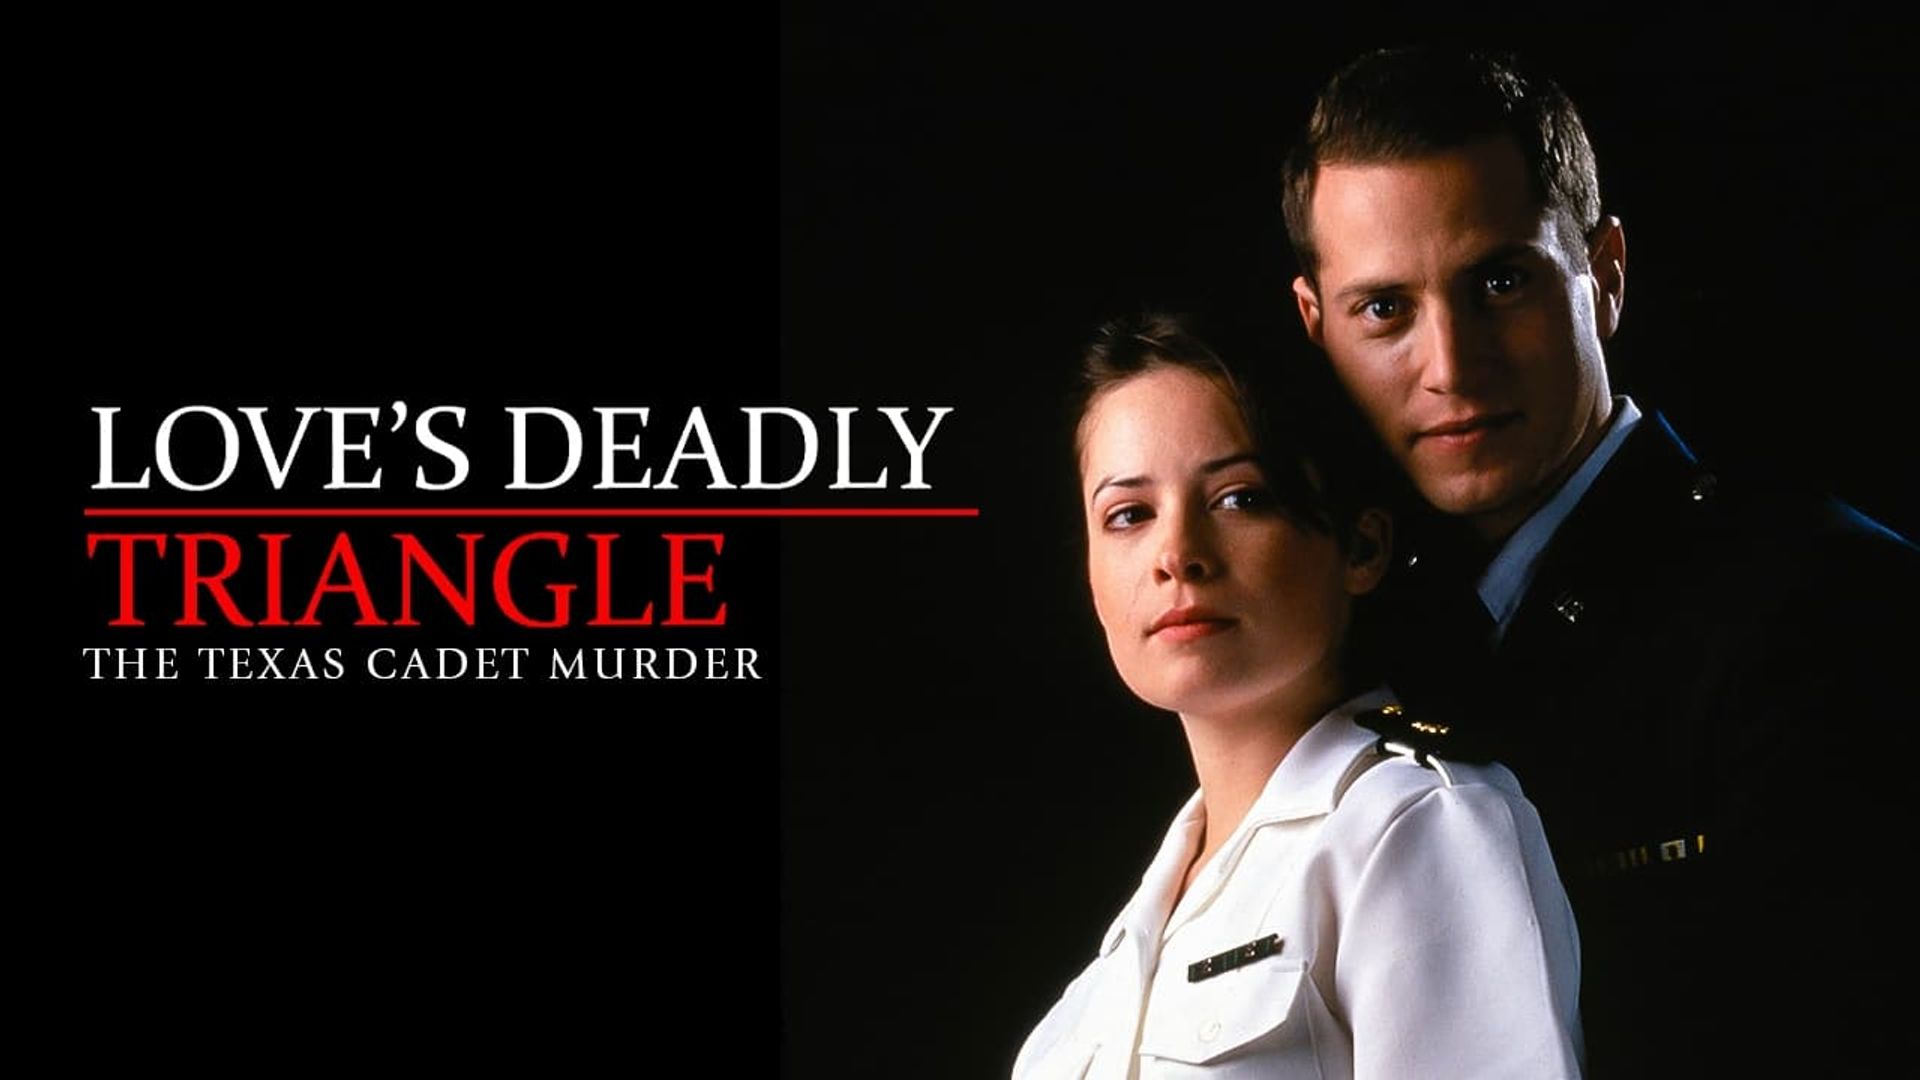 Love's Deadly Triangle: The Texas Cadet Murder background